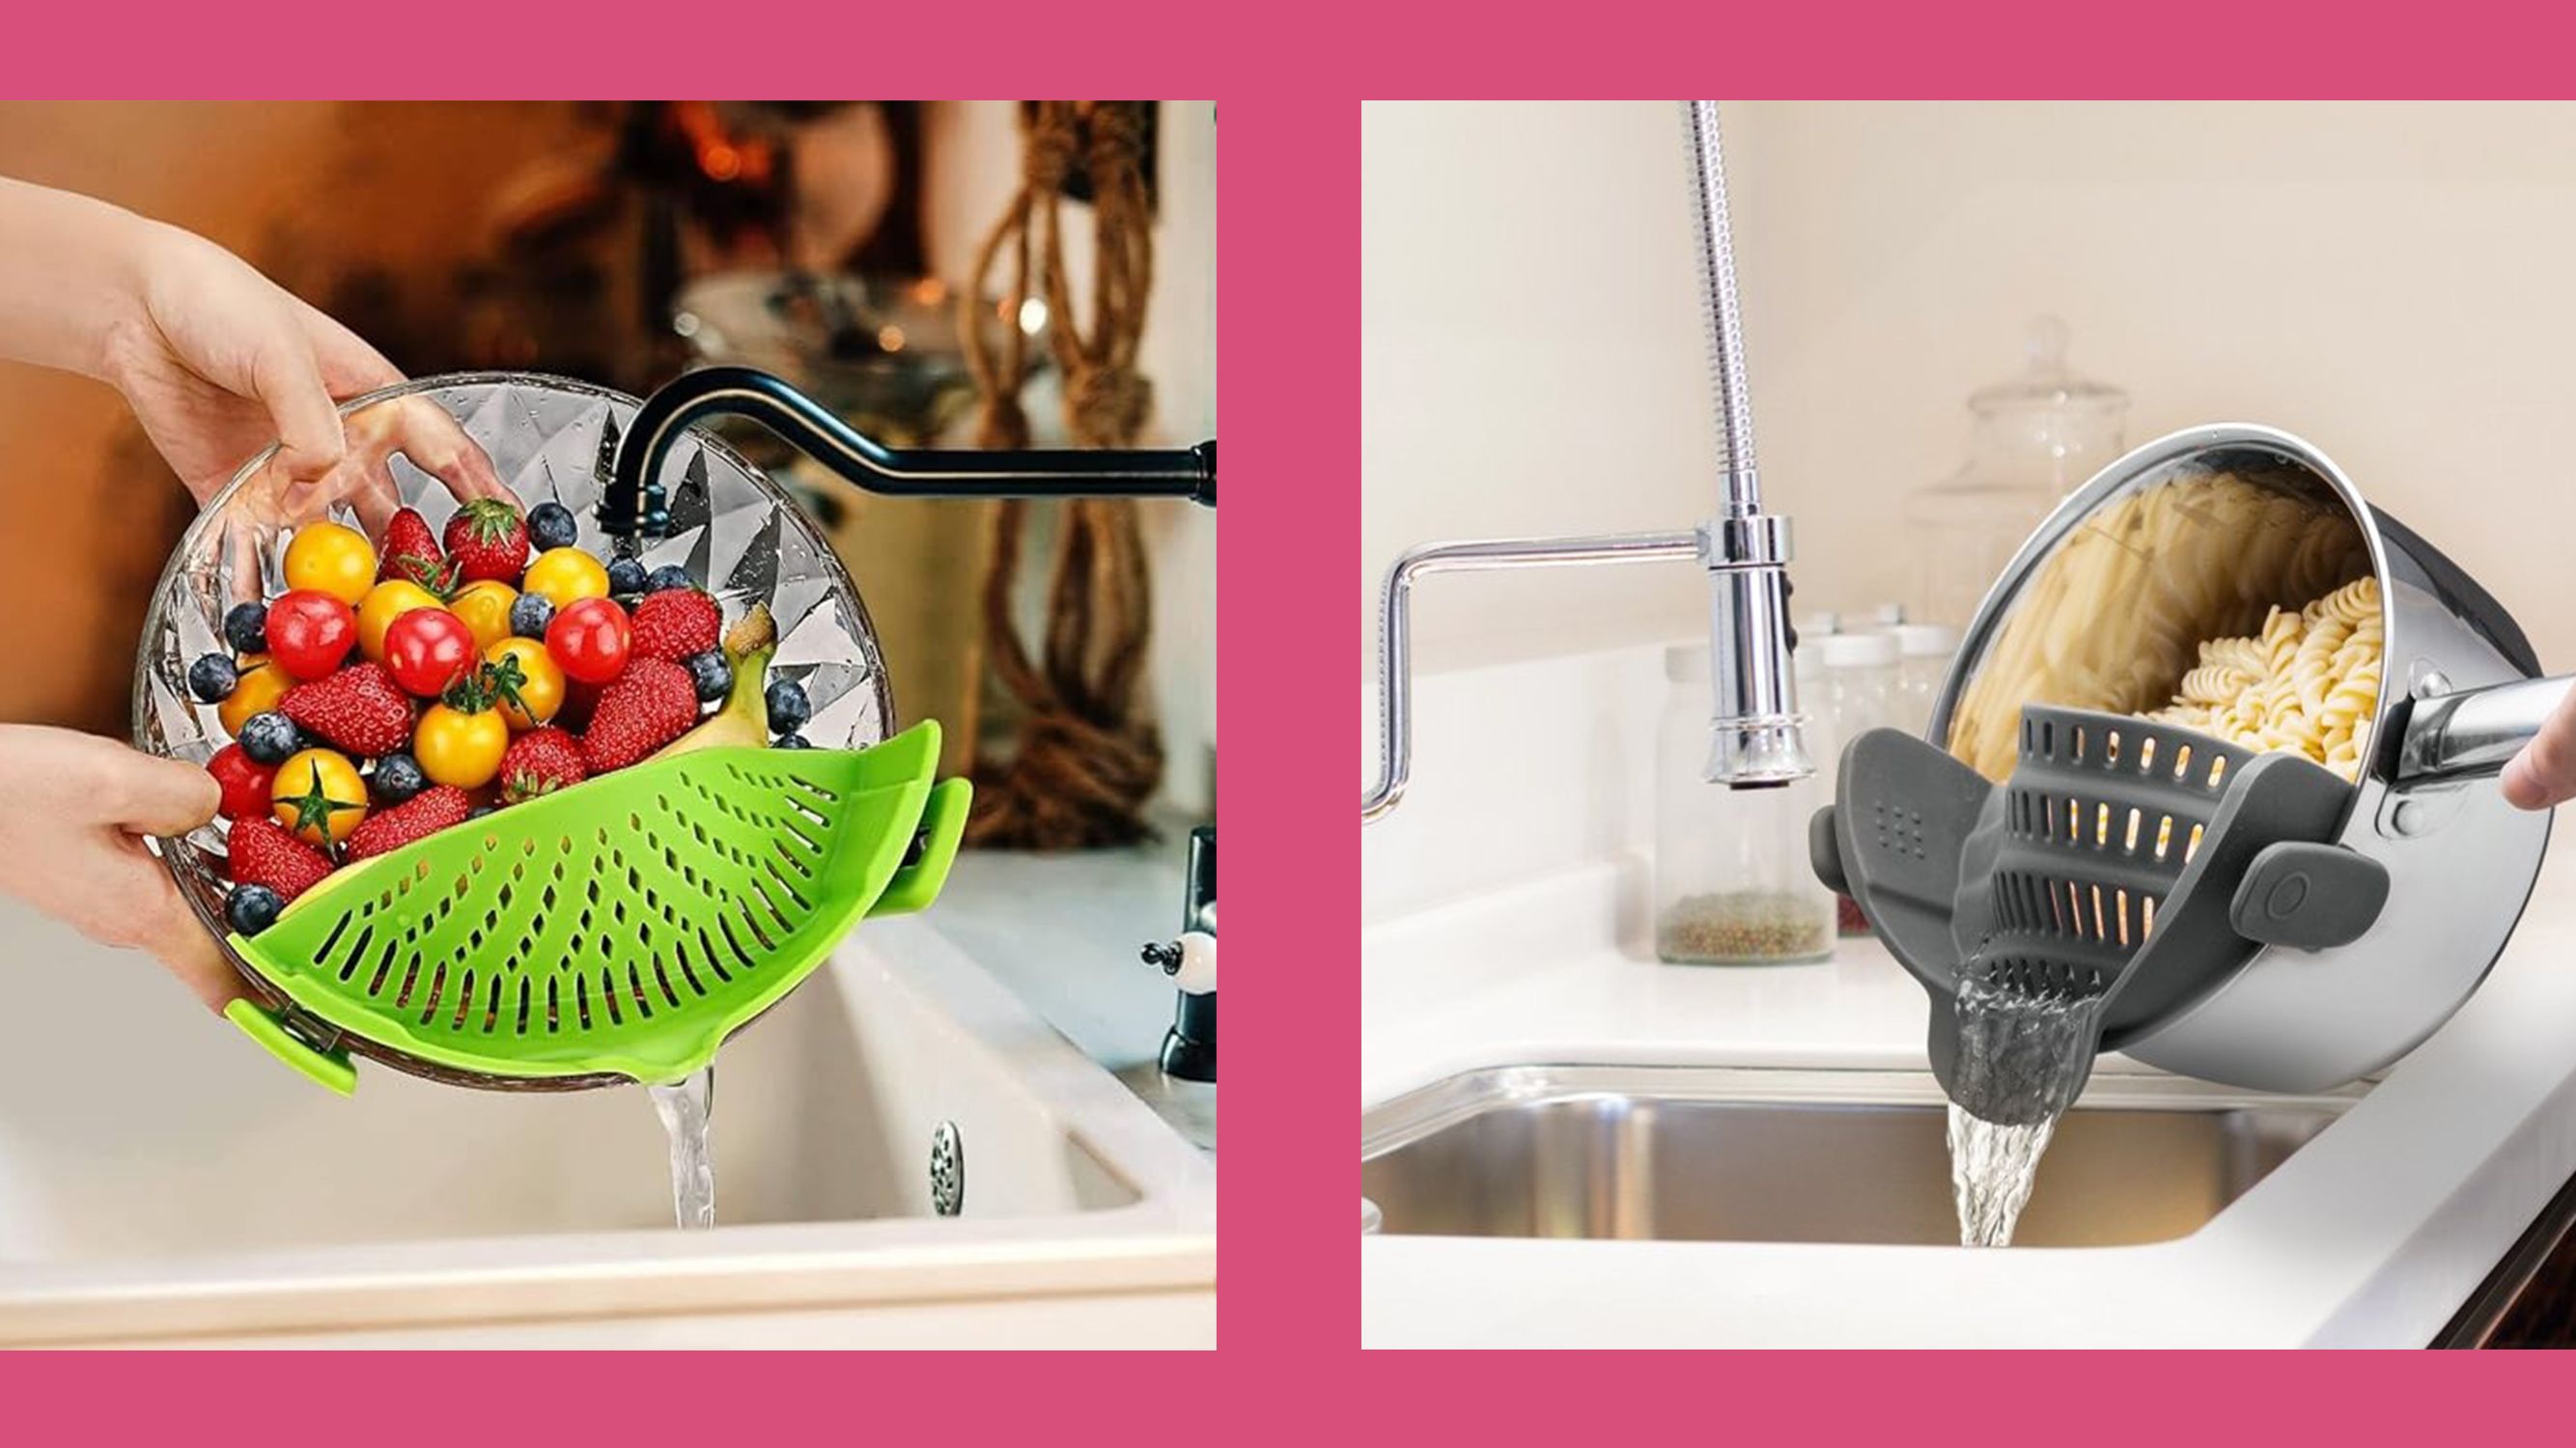 This snap-on colander makes a great gift for the gadget lover